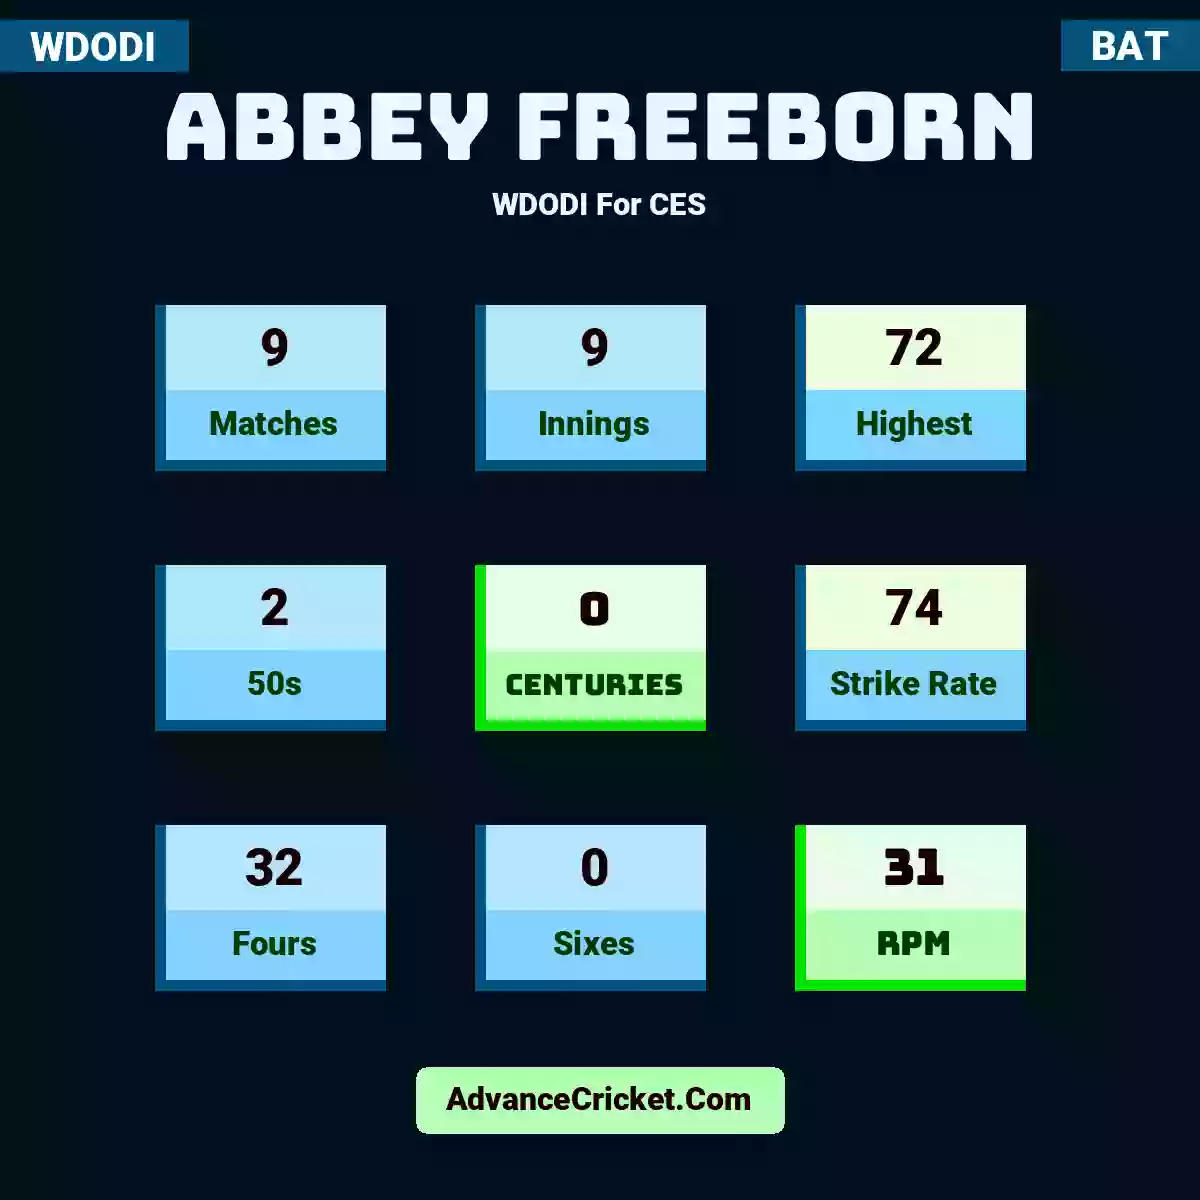 Abbey Freeborn WDODI  For CES, Abbey Freeborn played 9 matches, scored 72 runs as highest, 2 half-centuries, and 0 centuries, with a strike rate of 74. A.Freeborn hit 32 fours and 0 sixes, with an RPM of 31.